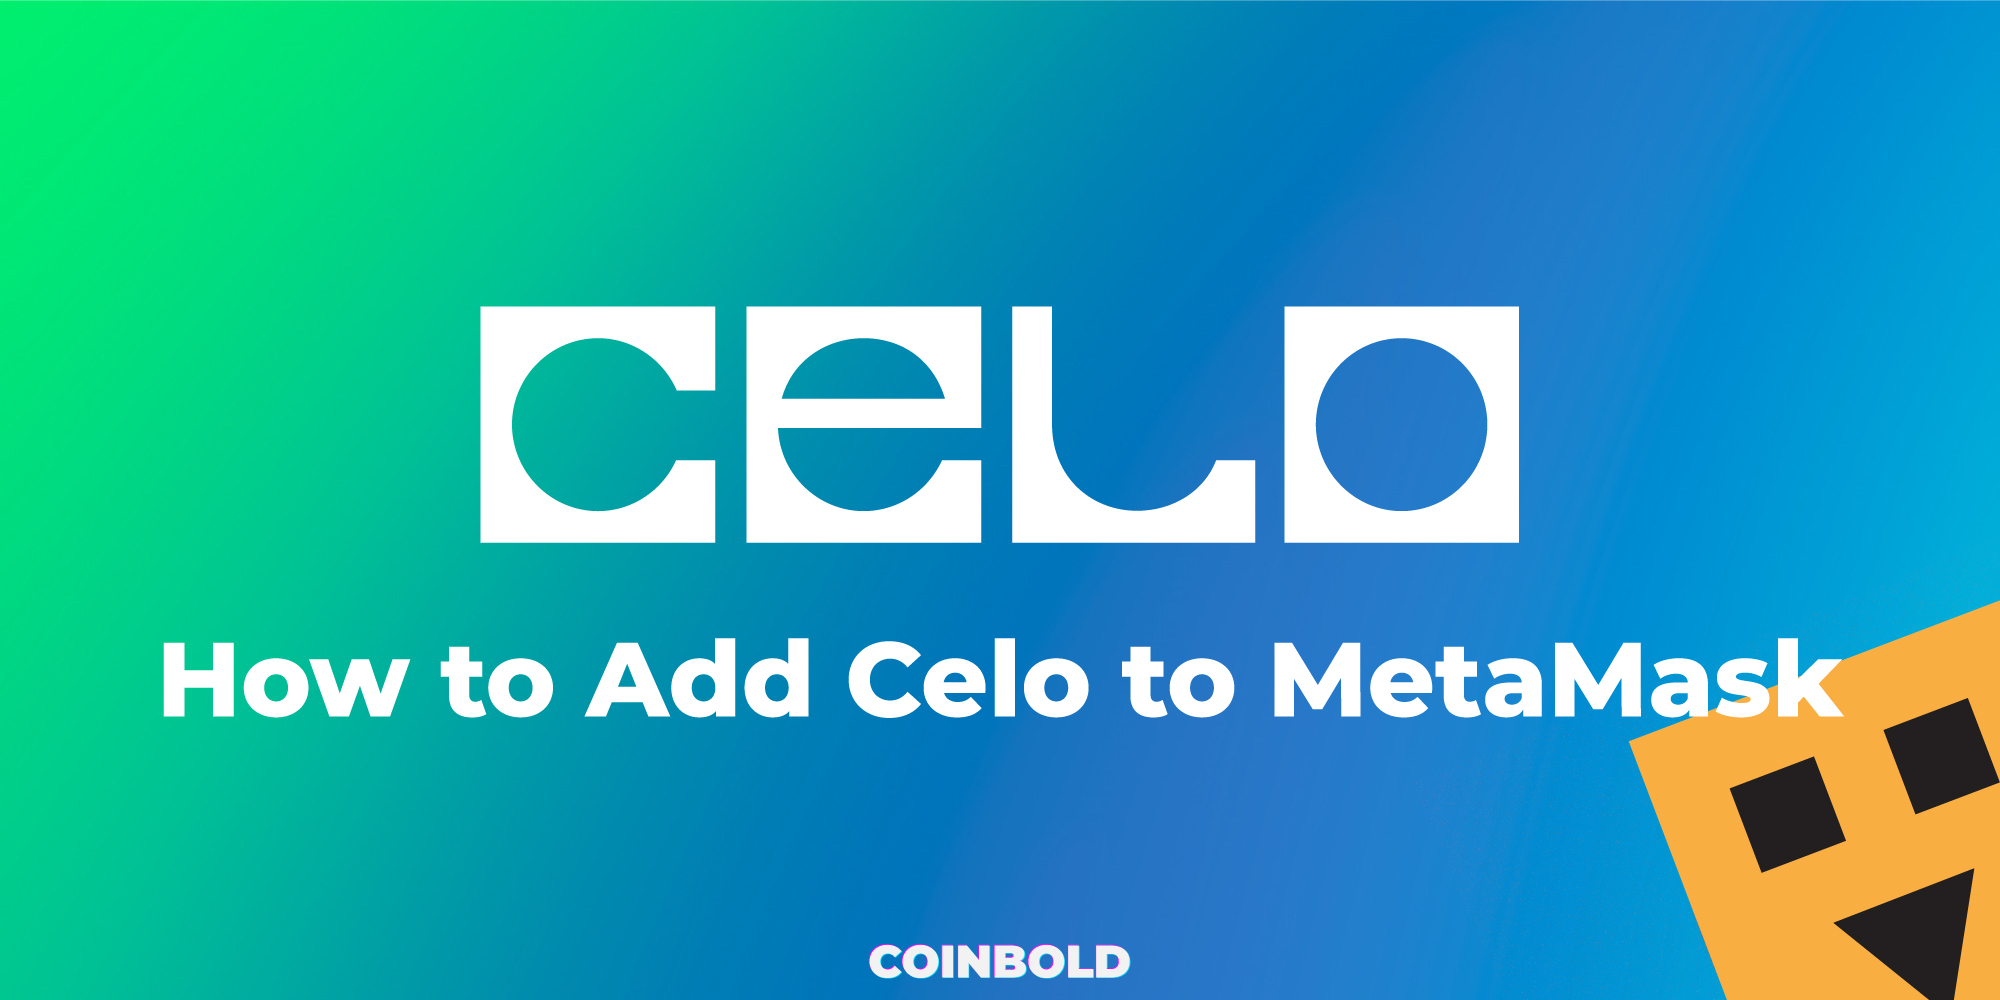 How to Add Celo to MetaMask